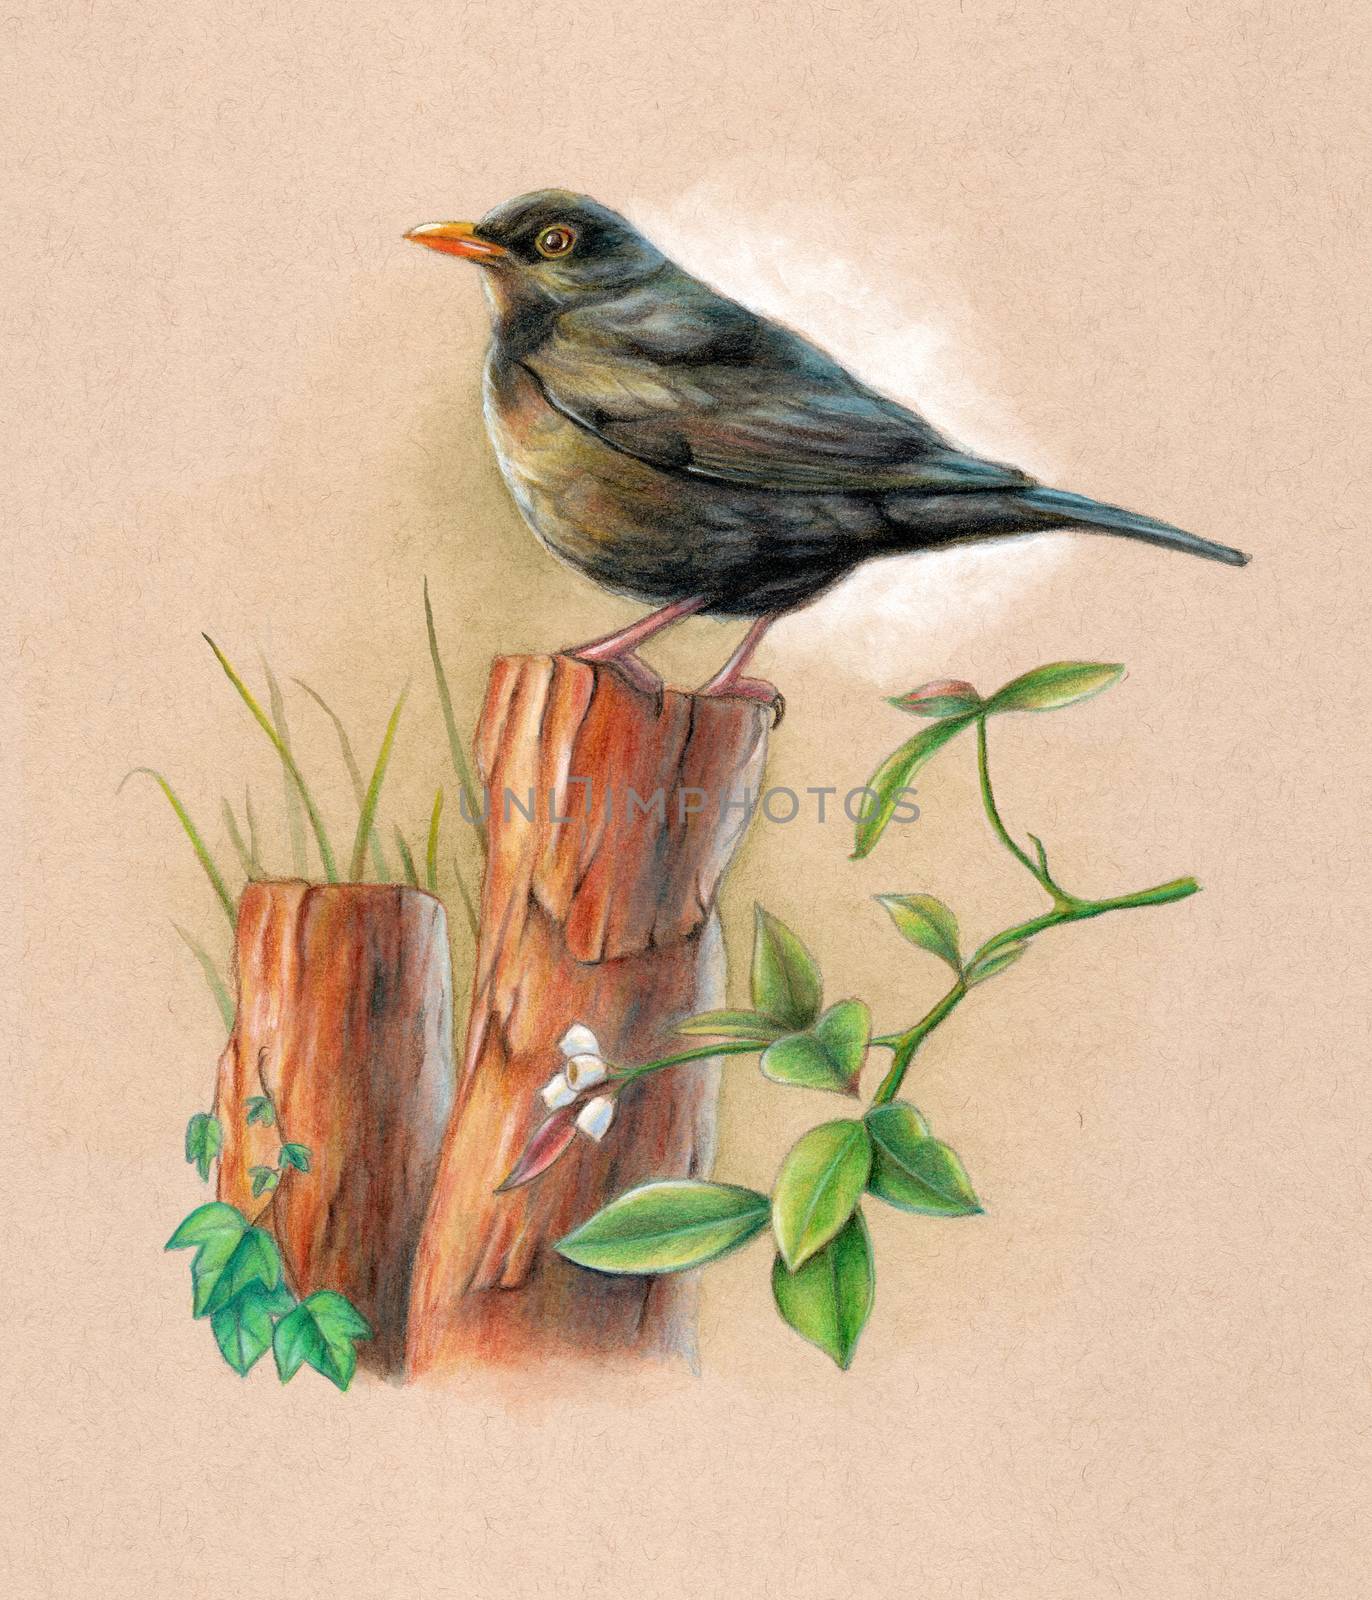 Male blackbird perched on a wood pole with some background vegetation. Mixed media illustration on toned paper.